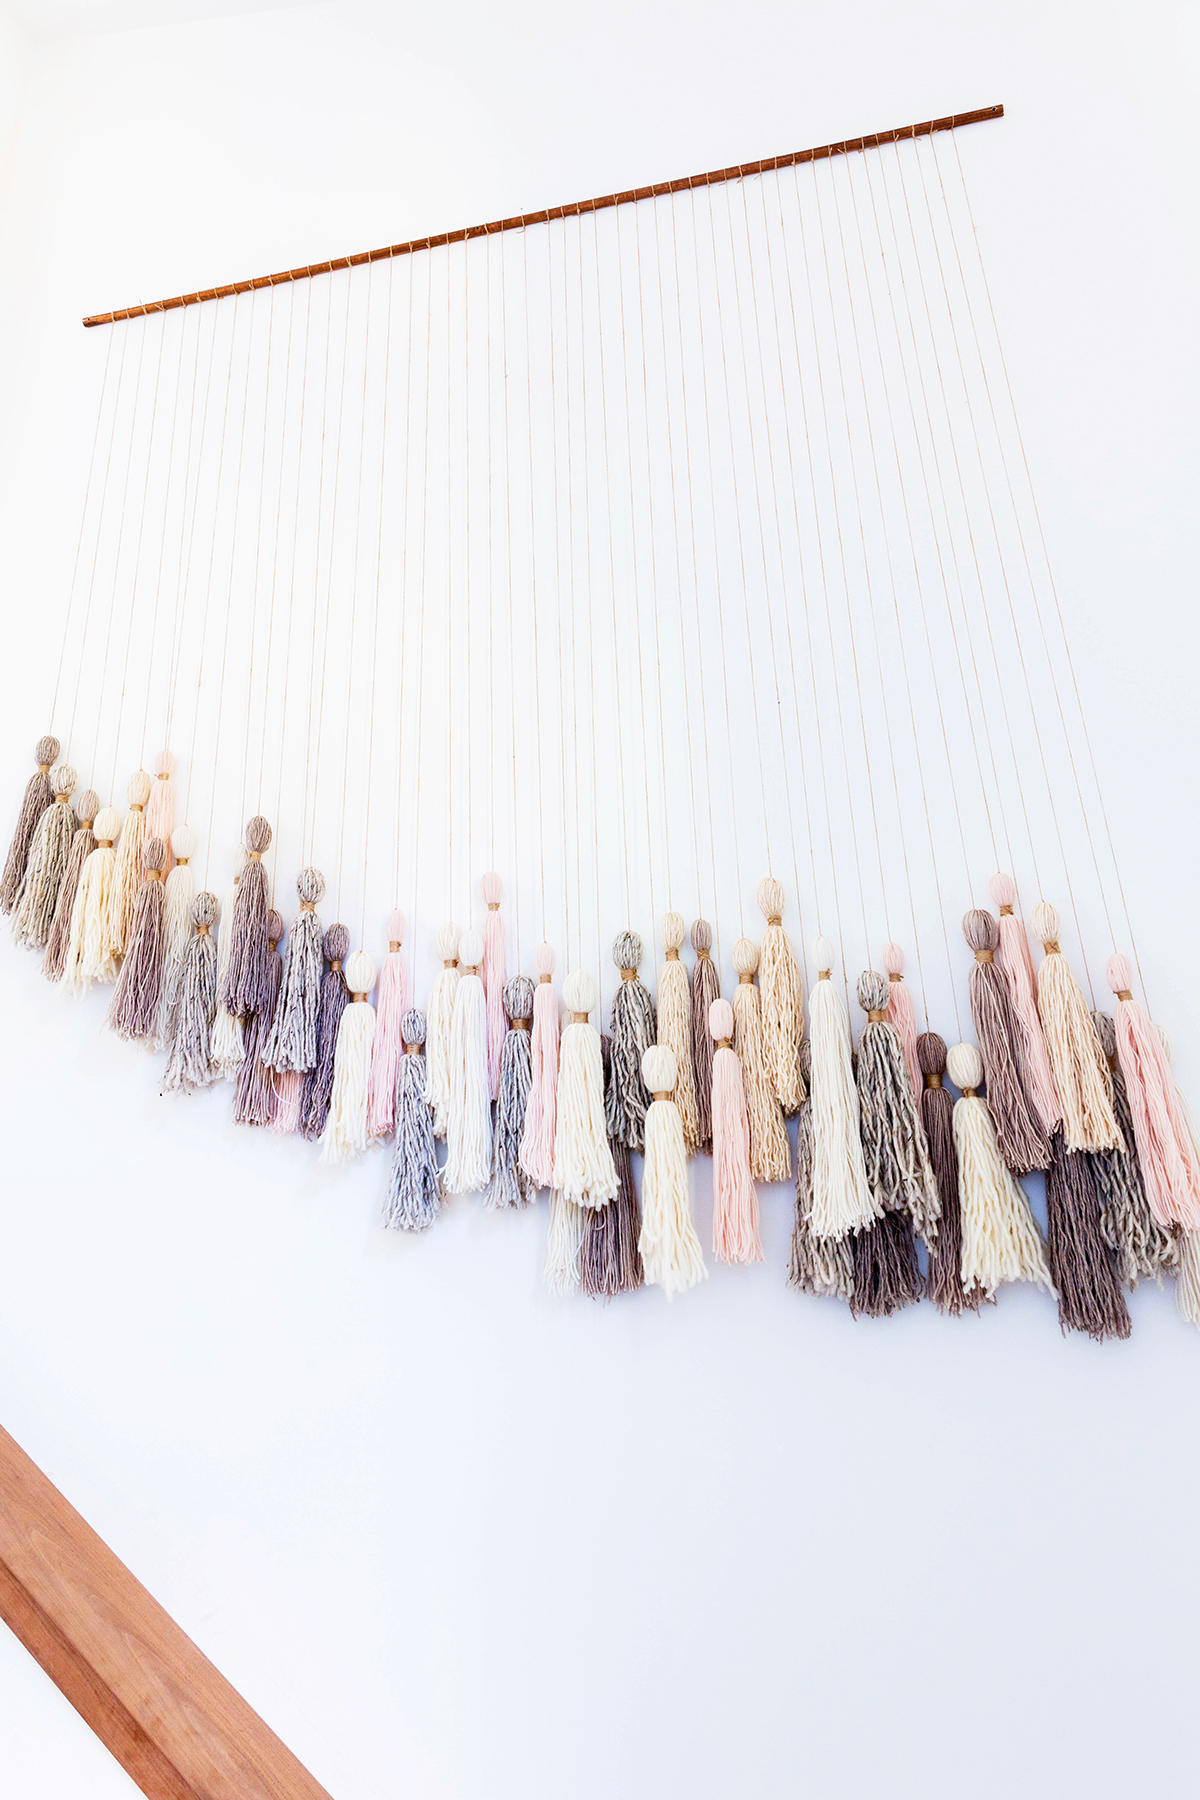 Tassel-wall-hanging-from-Honestly-WTF